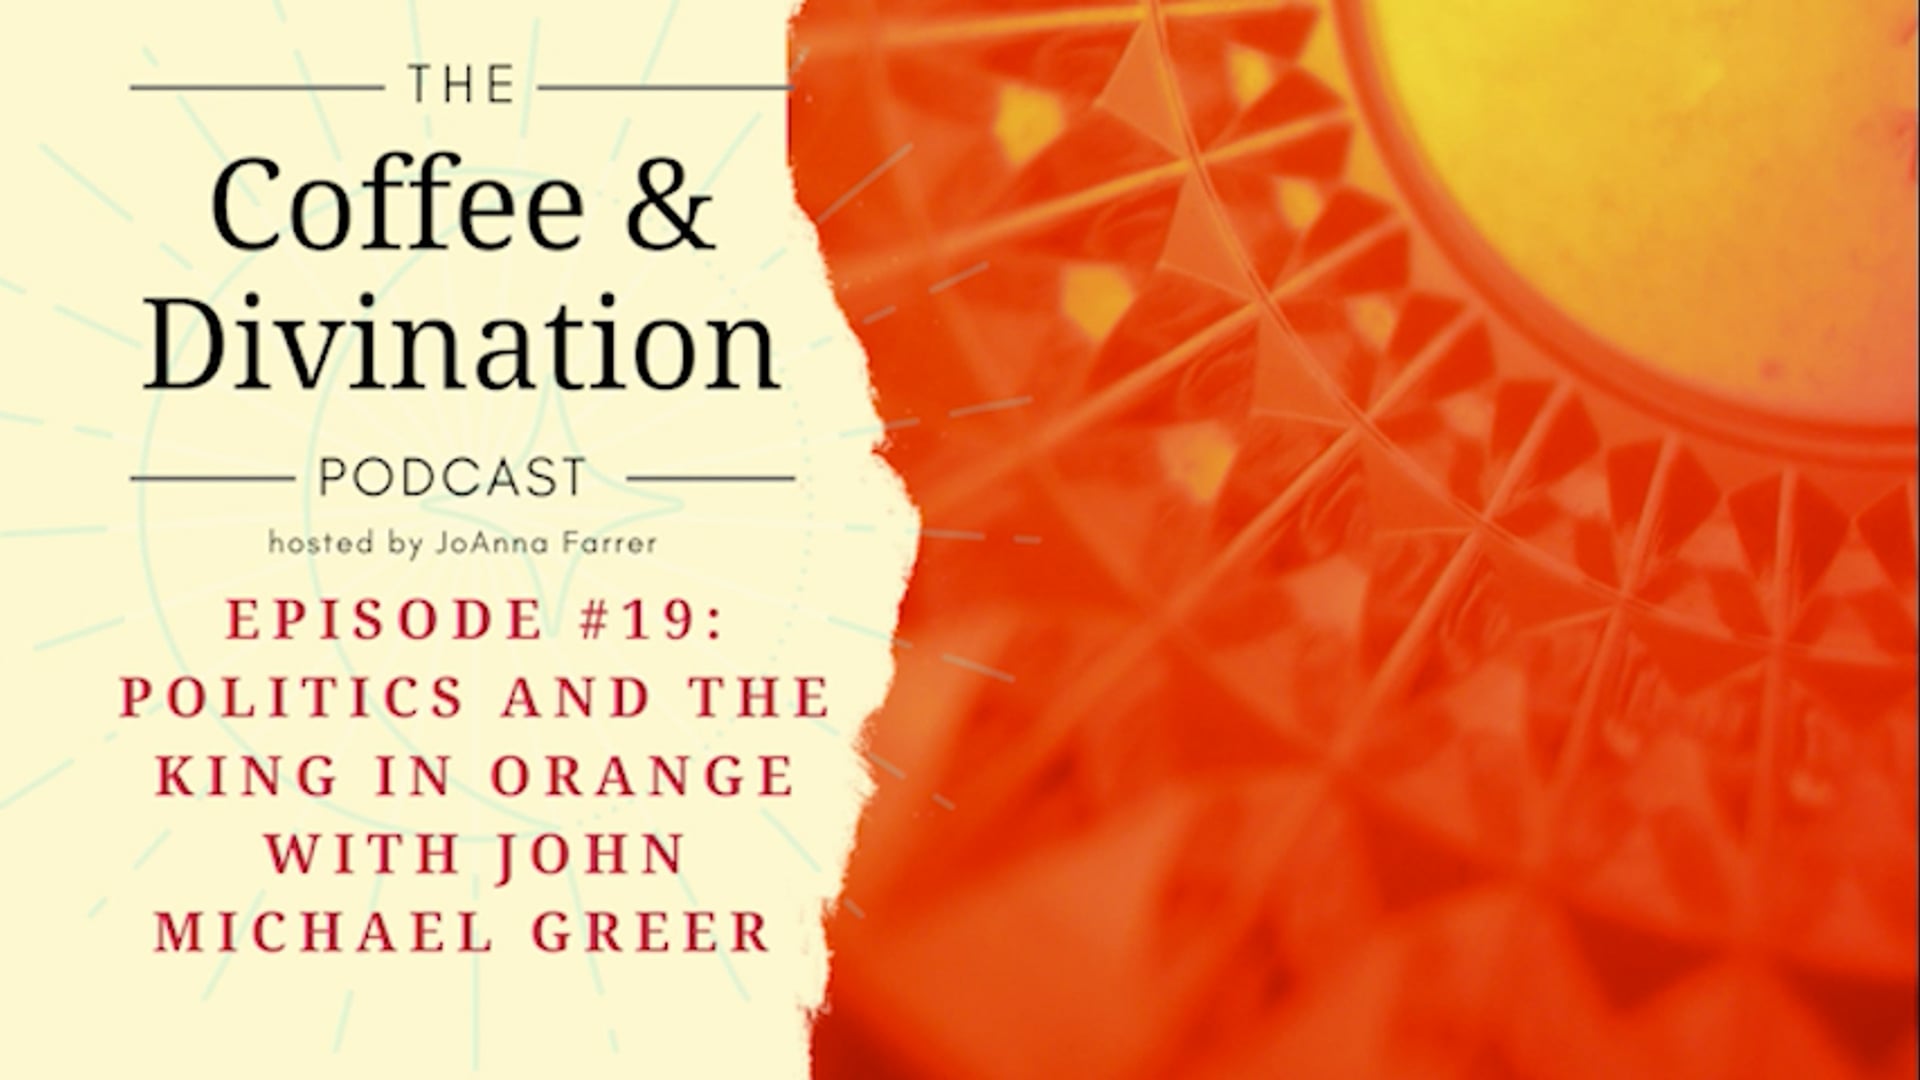 Episode #19: Politics and the King in Orange with John Michael Greer